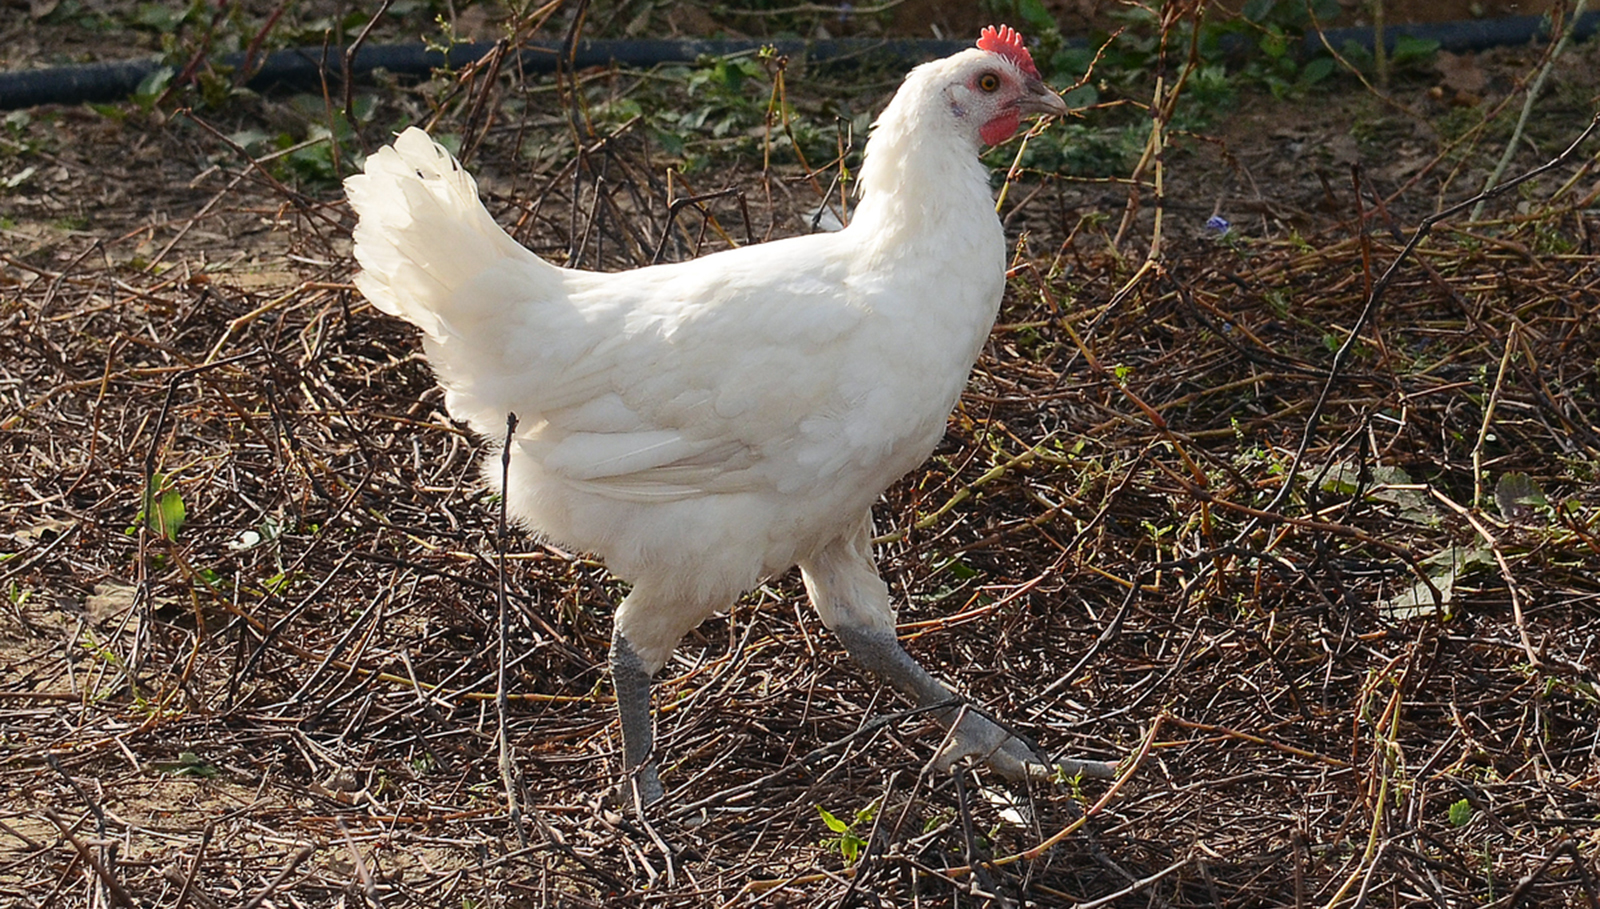 Bresse chicken, found in France, is world's most expensive